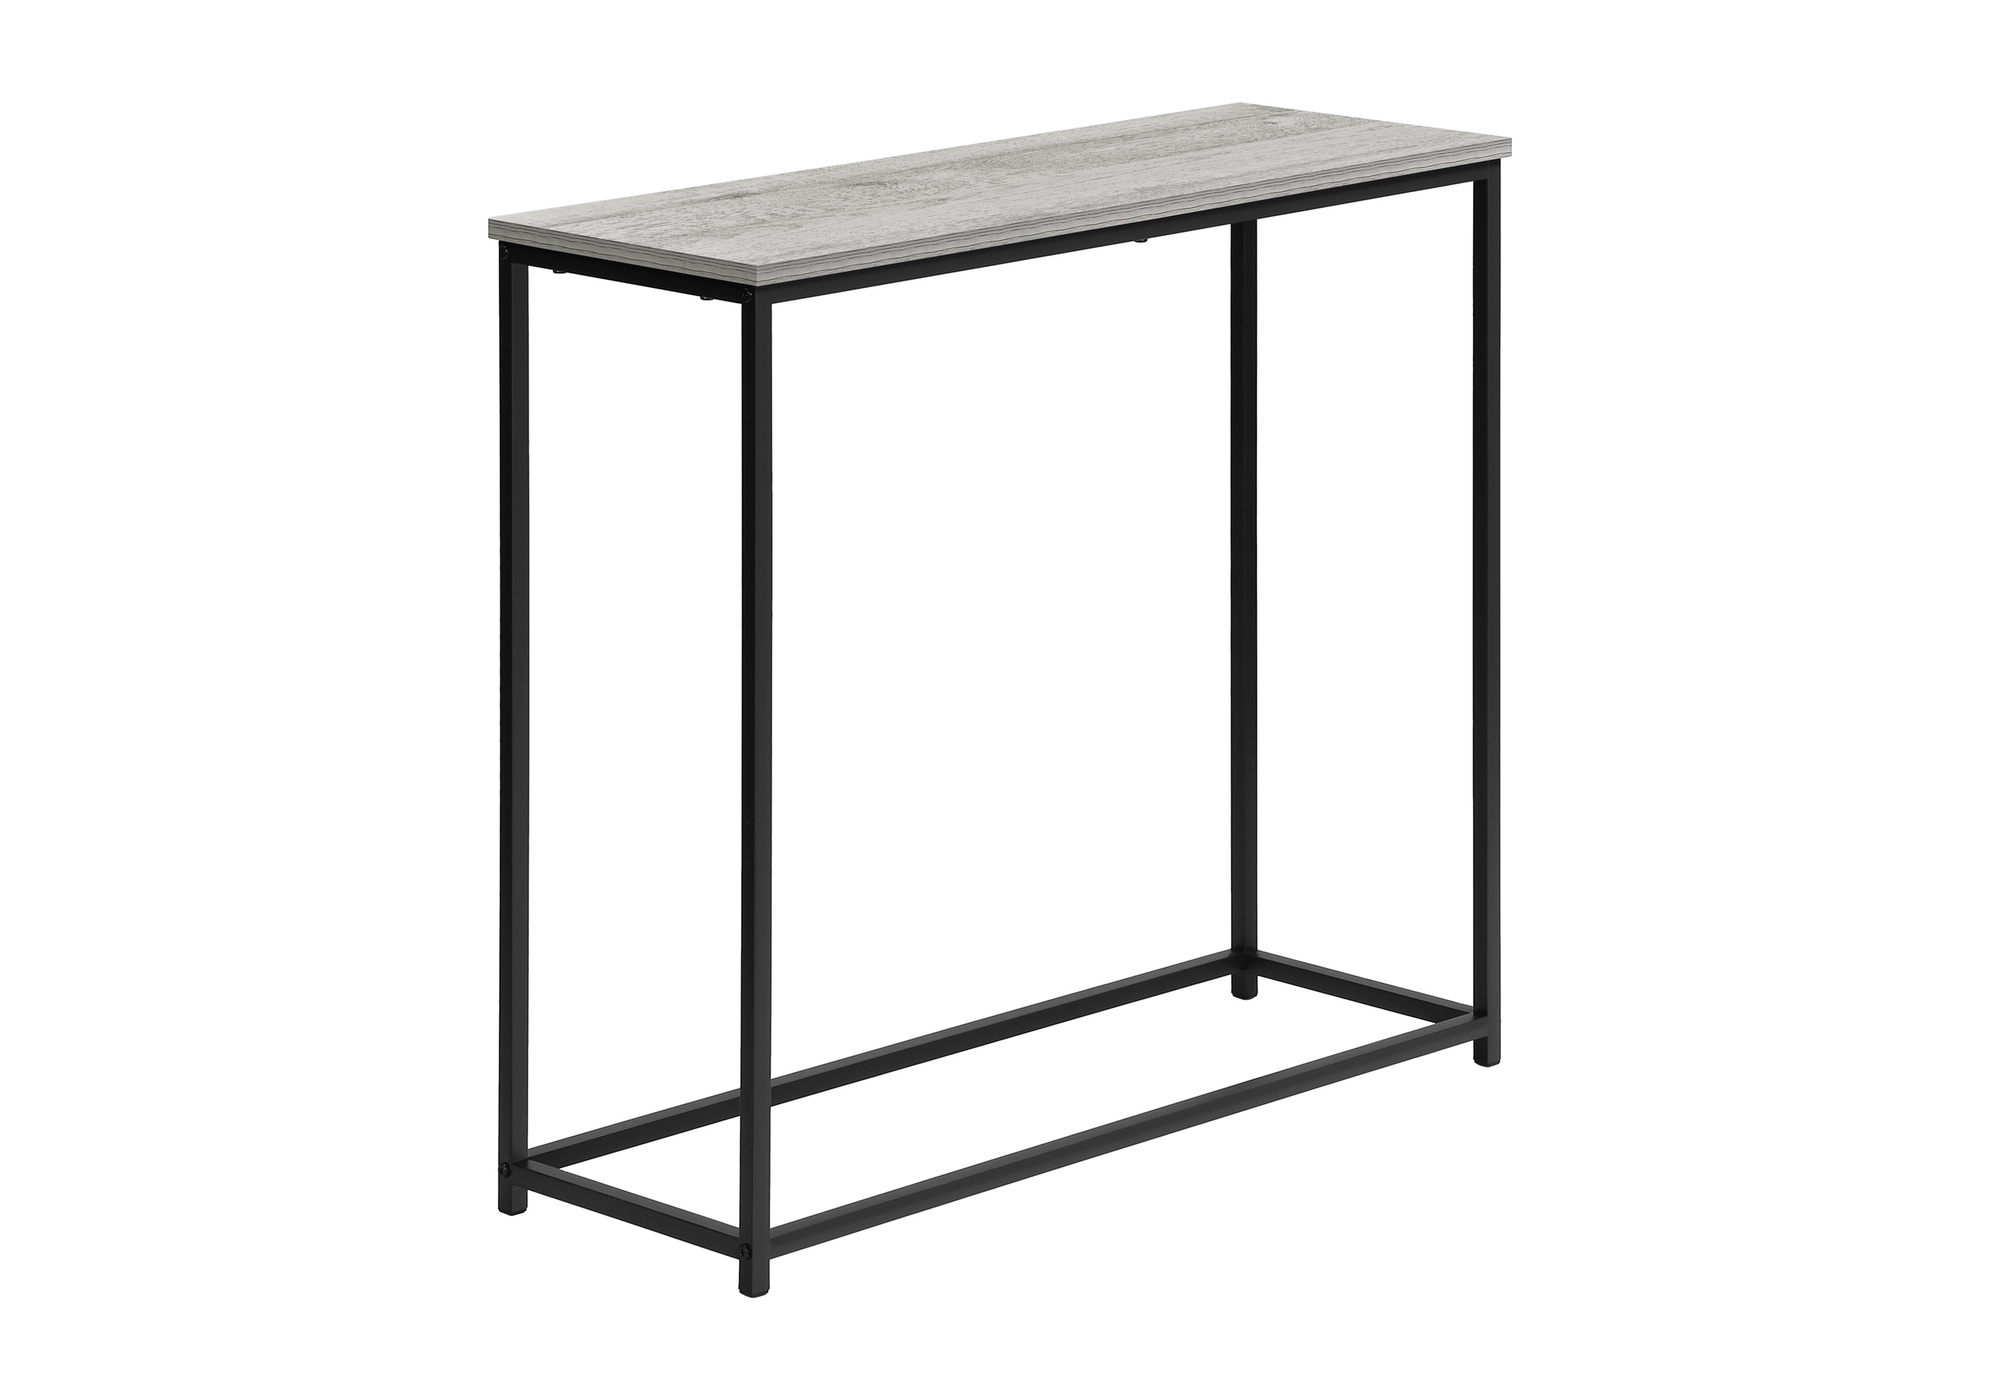 ACCENT TABLE - 32"L / GREY / BLACK METAL HALL CONSOLE